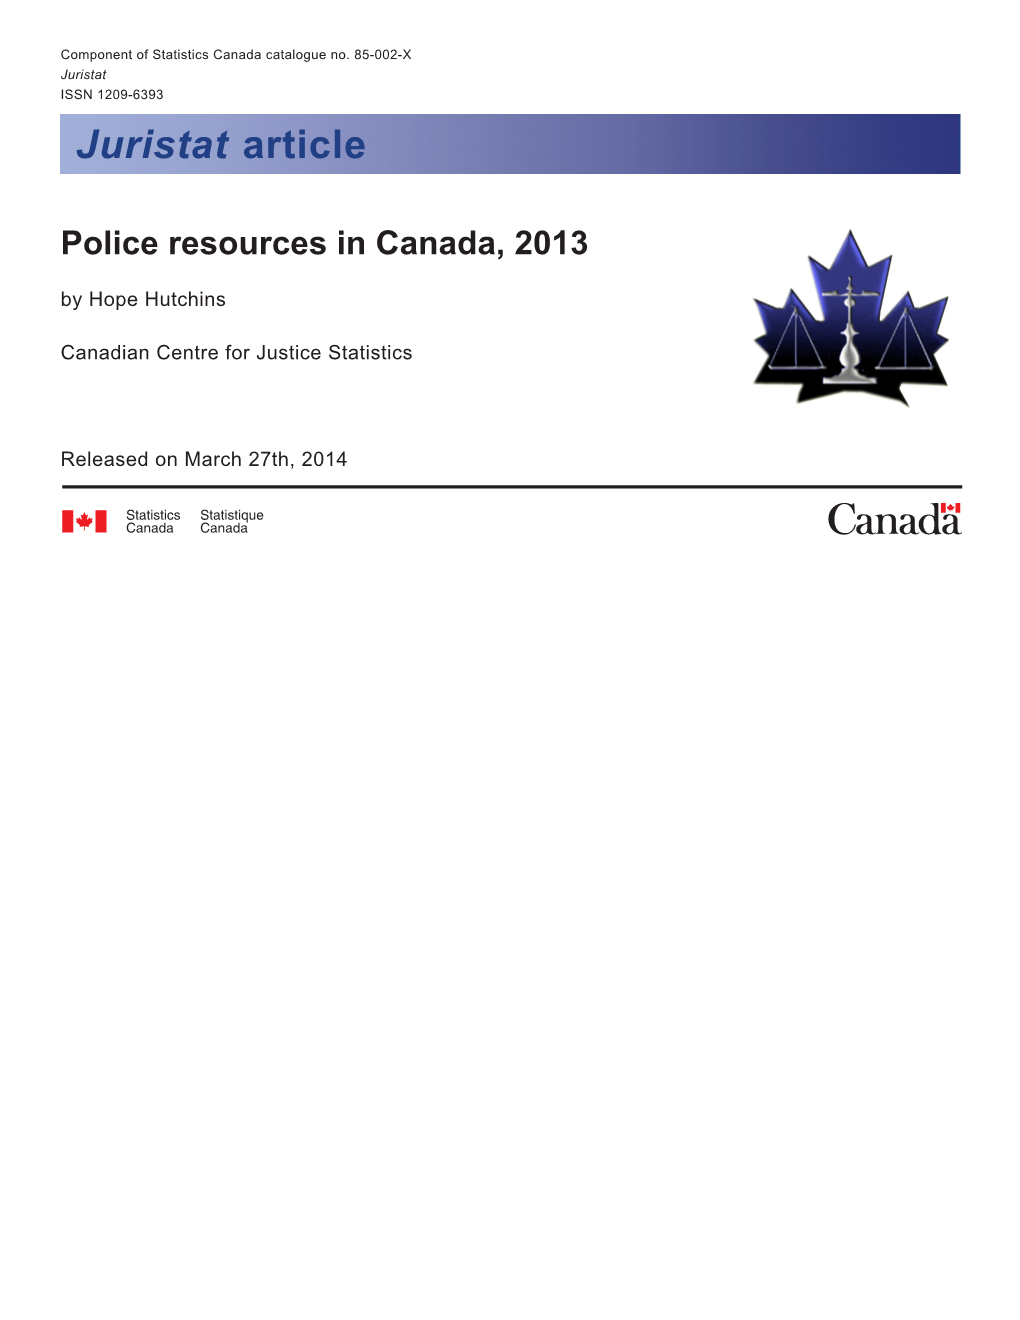 Police Resources in Canada, 2013 by Hope Hutchins